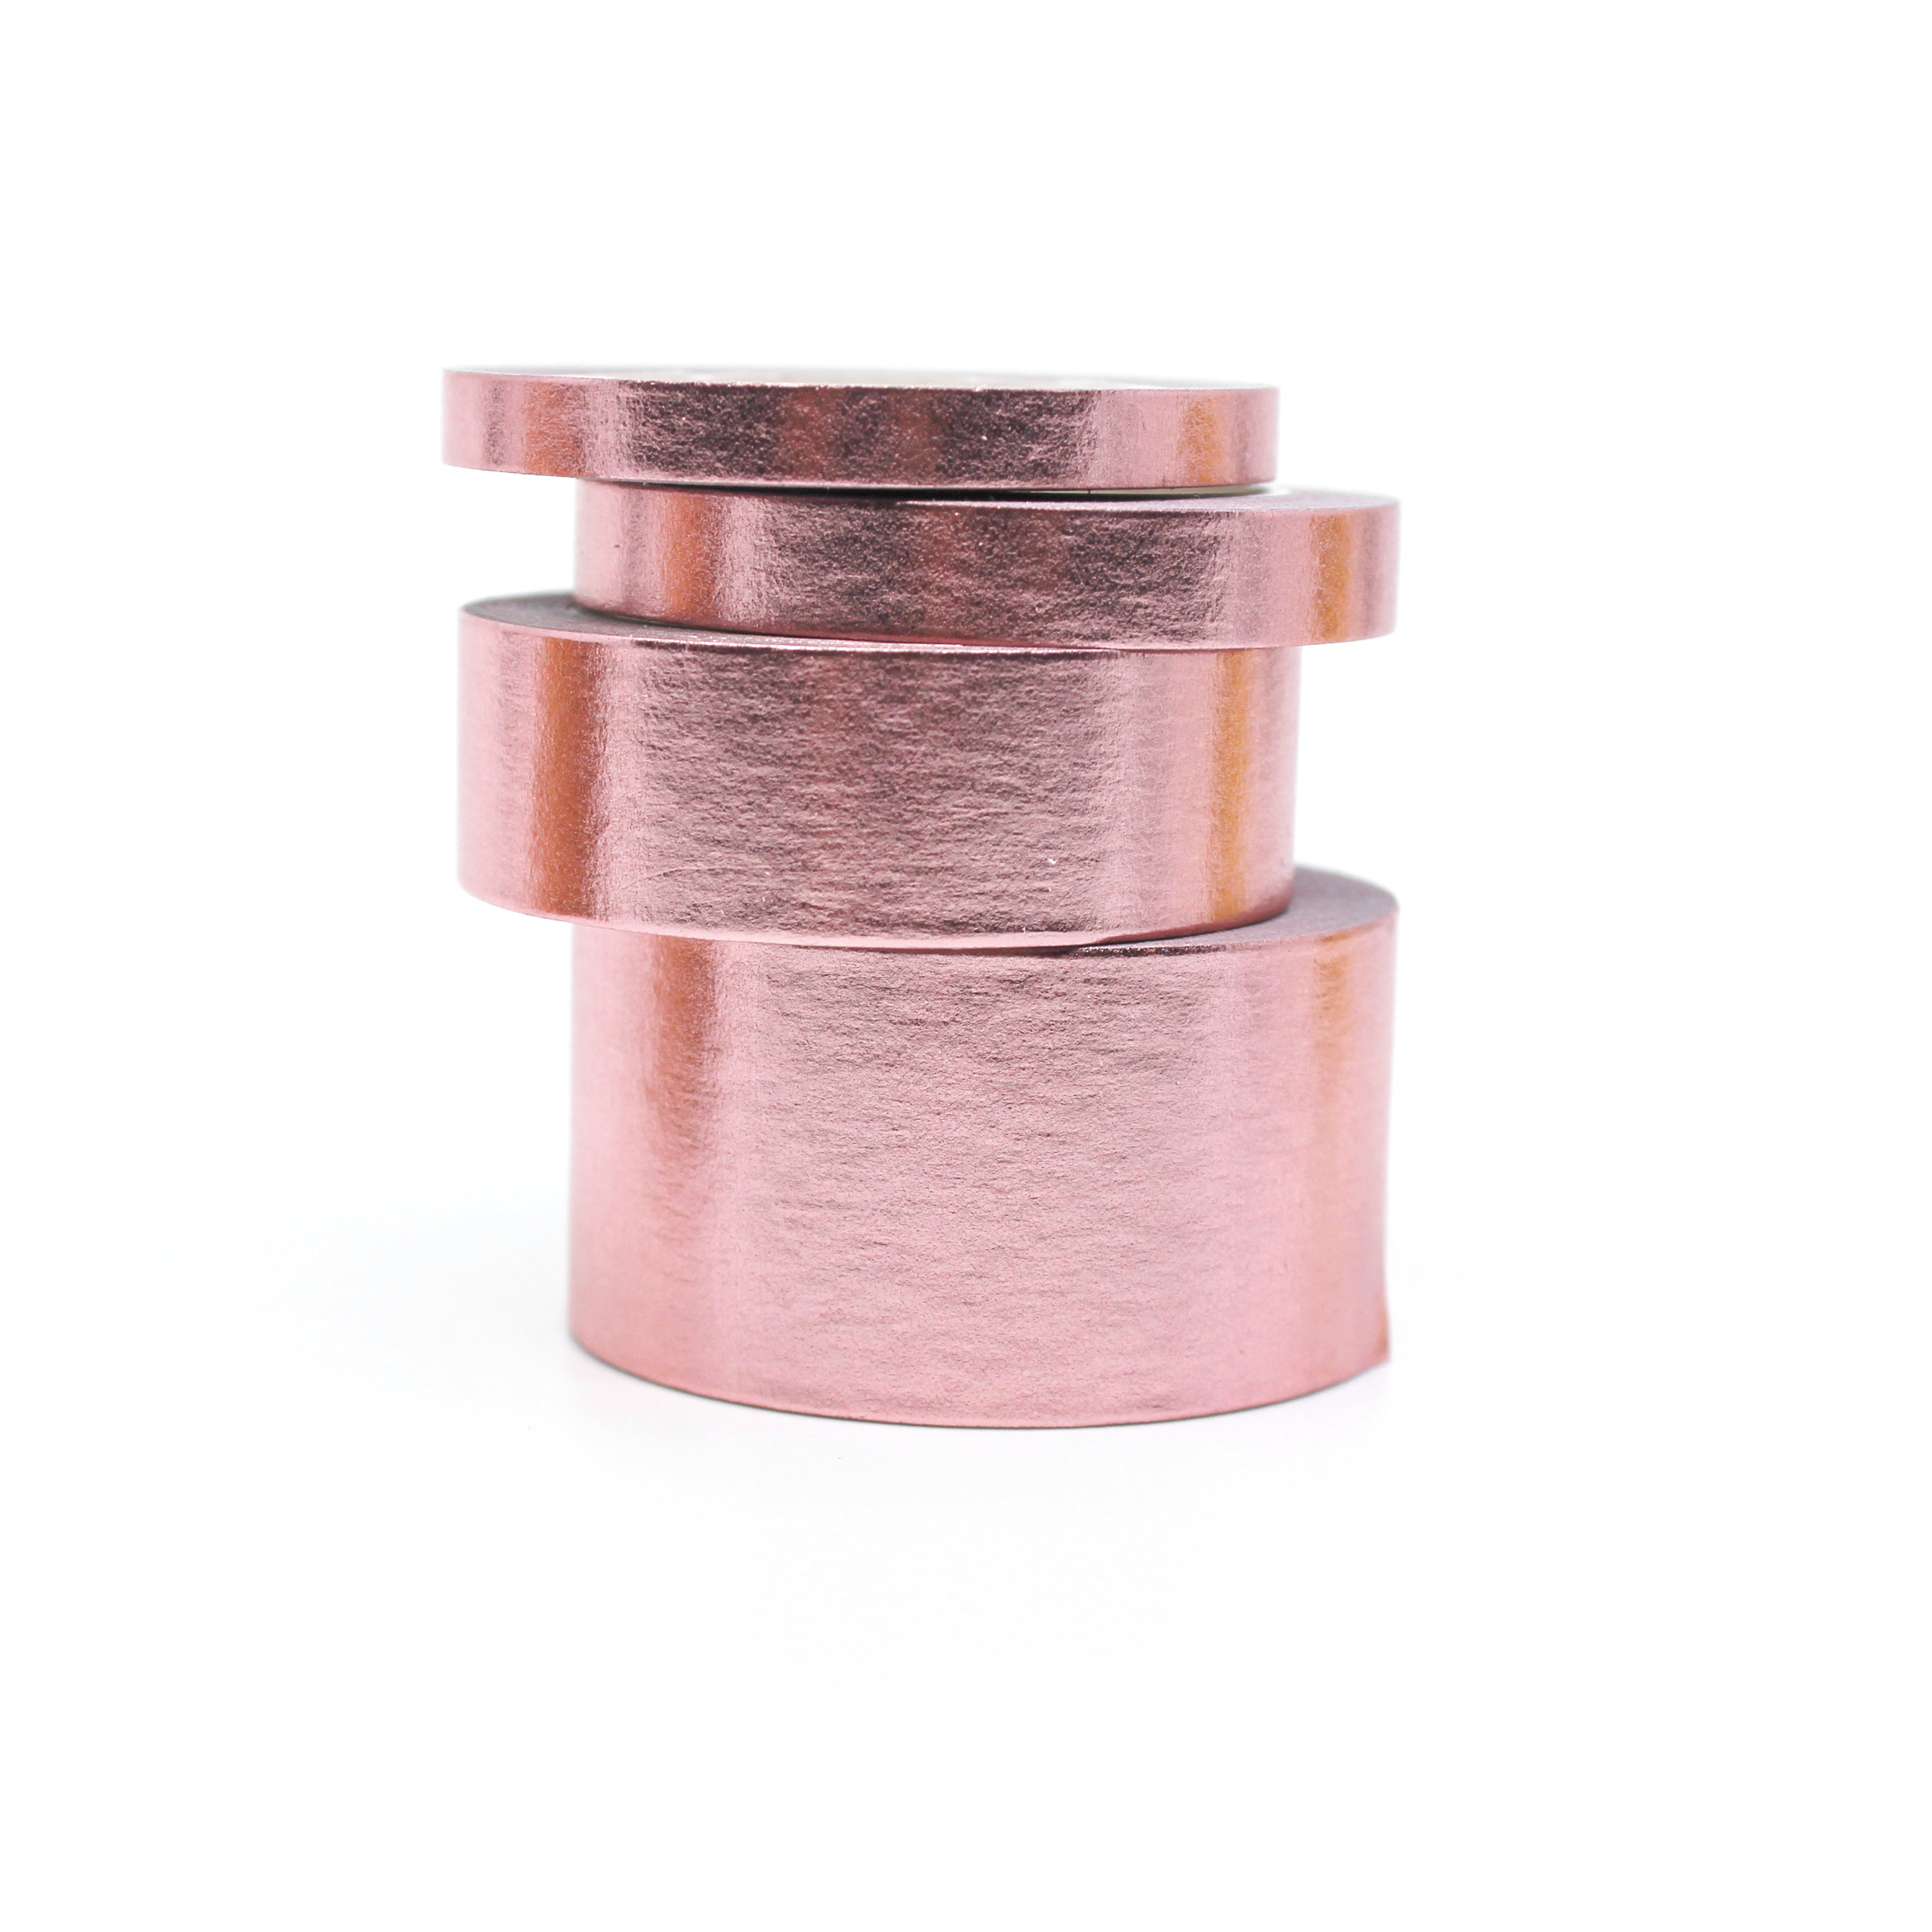 Elevate your creations with our captivating solid foil rose gold washi tape, showcasing a smooth and shiny surface in a radiant gold color, perfect for adding a touch of opulence and sophistication. This tape is sold exclusively at BBB Supplies Craft Shop.